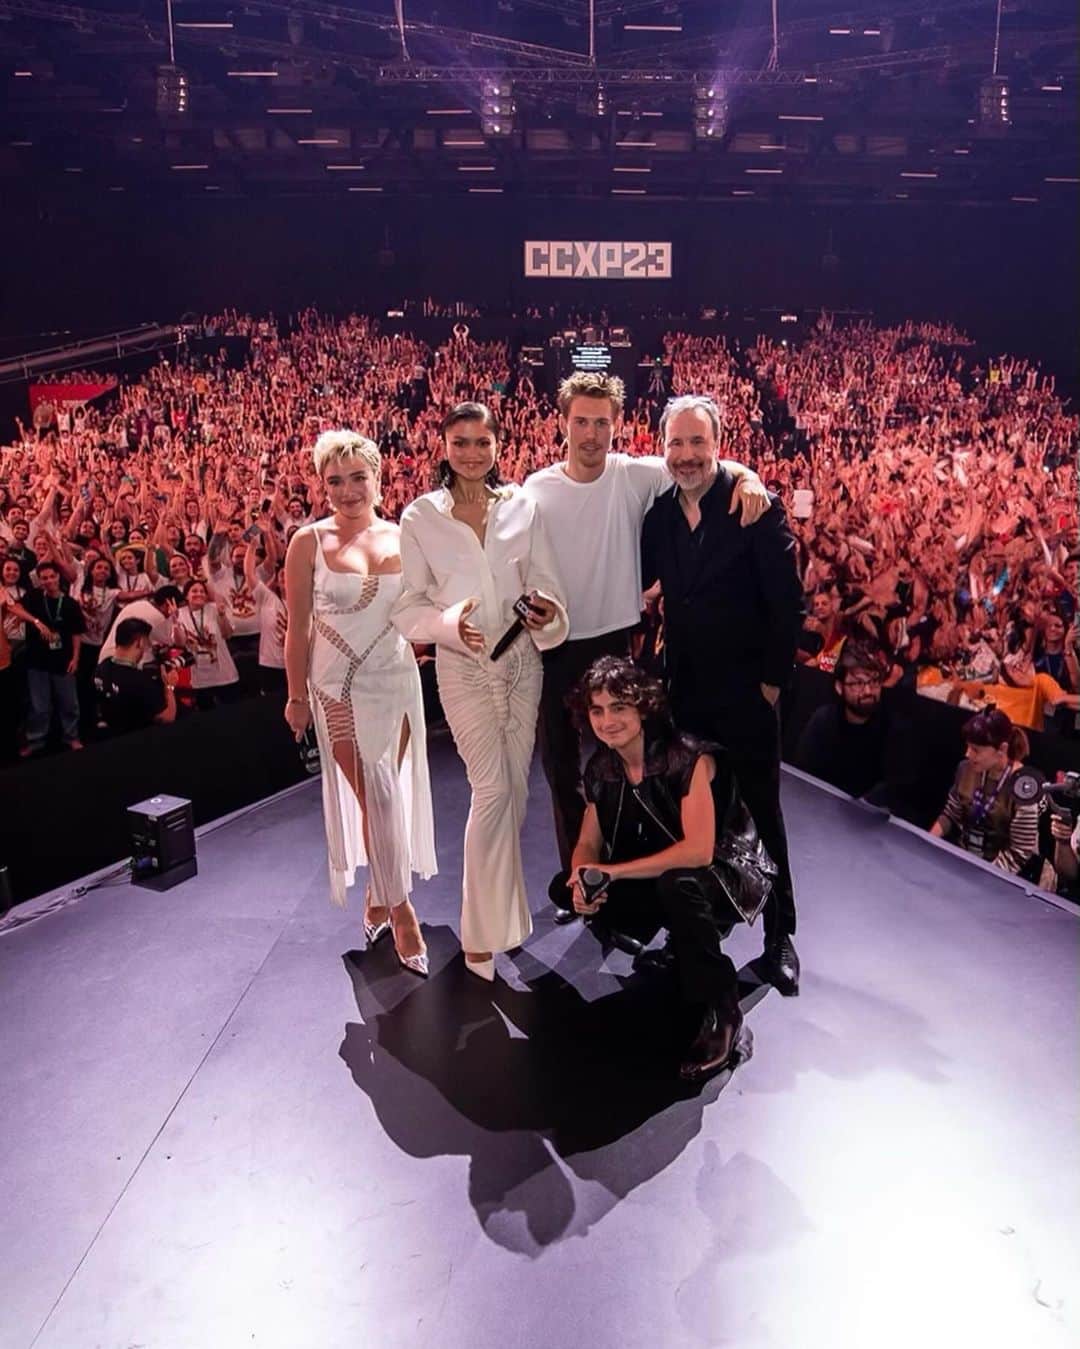 Just Jaredのインスタグラム：「Zendaya, Timothee Chalamet, Florence Pugh and Austin Butler promote their latest film  Dune: Part Two  at the CCXP 2023 convention held in in São Paulo, Brazil. Z in Schiaparelli, Timothee in Celine, Florence in Di Petsa, and Austin in Courreges. #Zendaya #TimotheeChalamet #FlorencePugh #AustinButler Photos: WB」